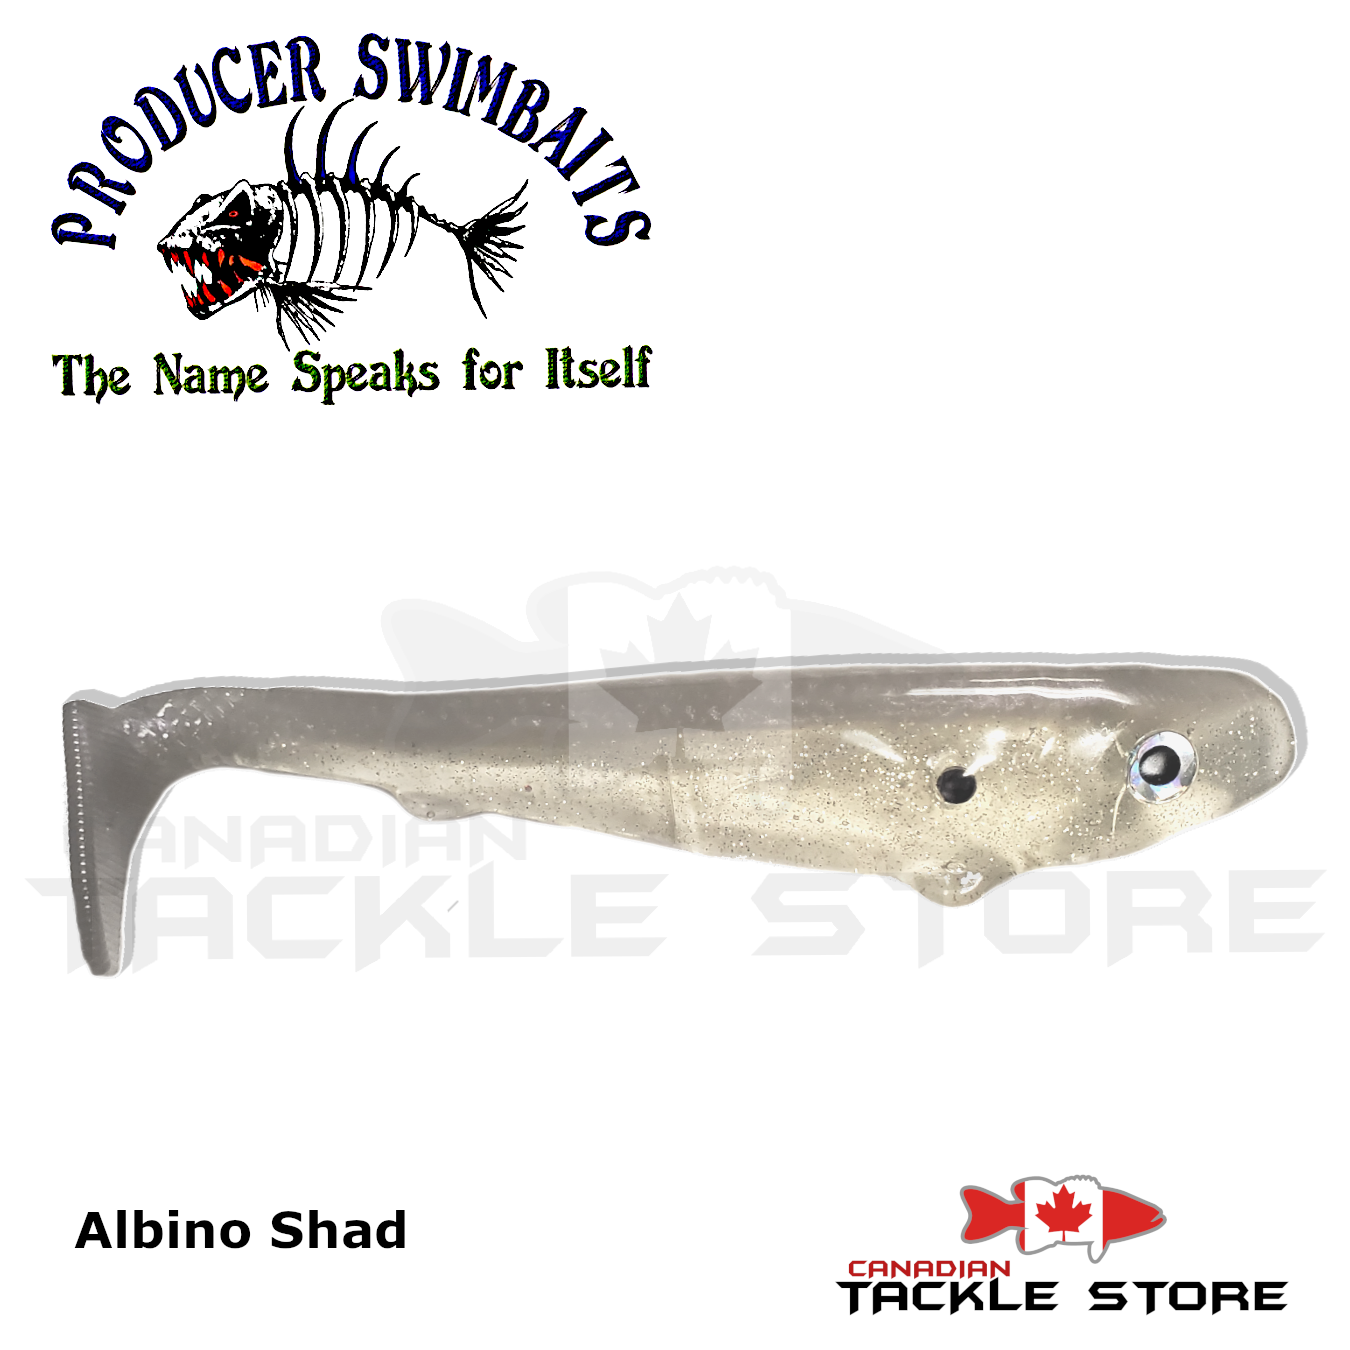 All Soft Plastic – Canadian Tackle Store